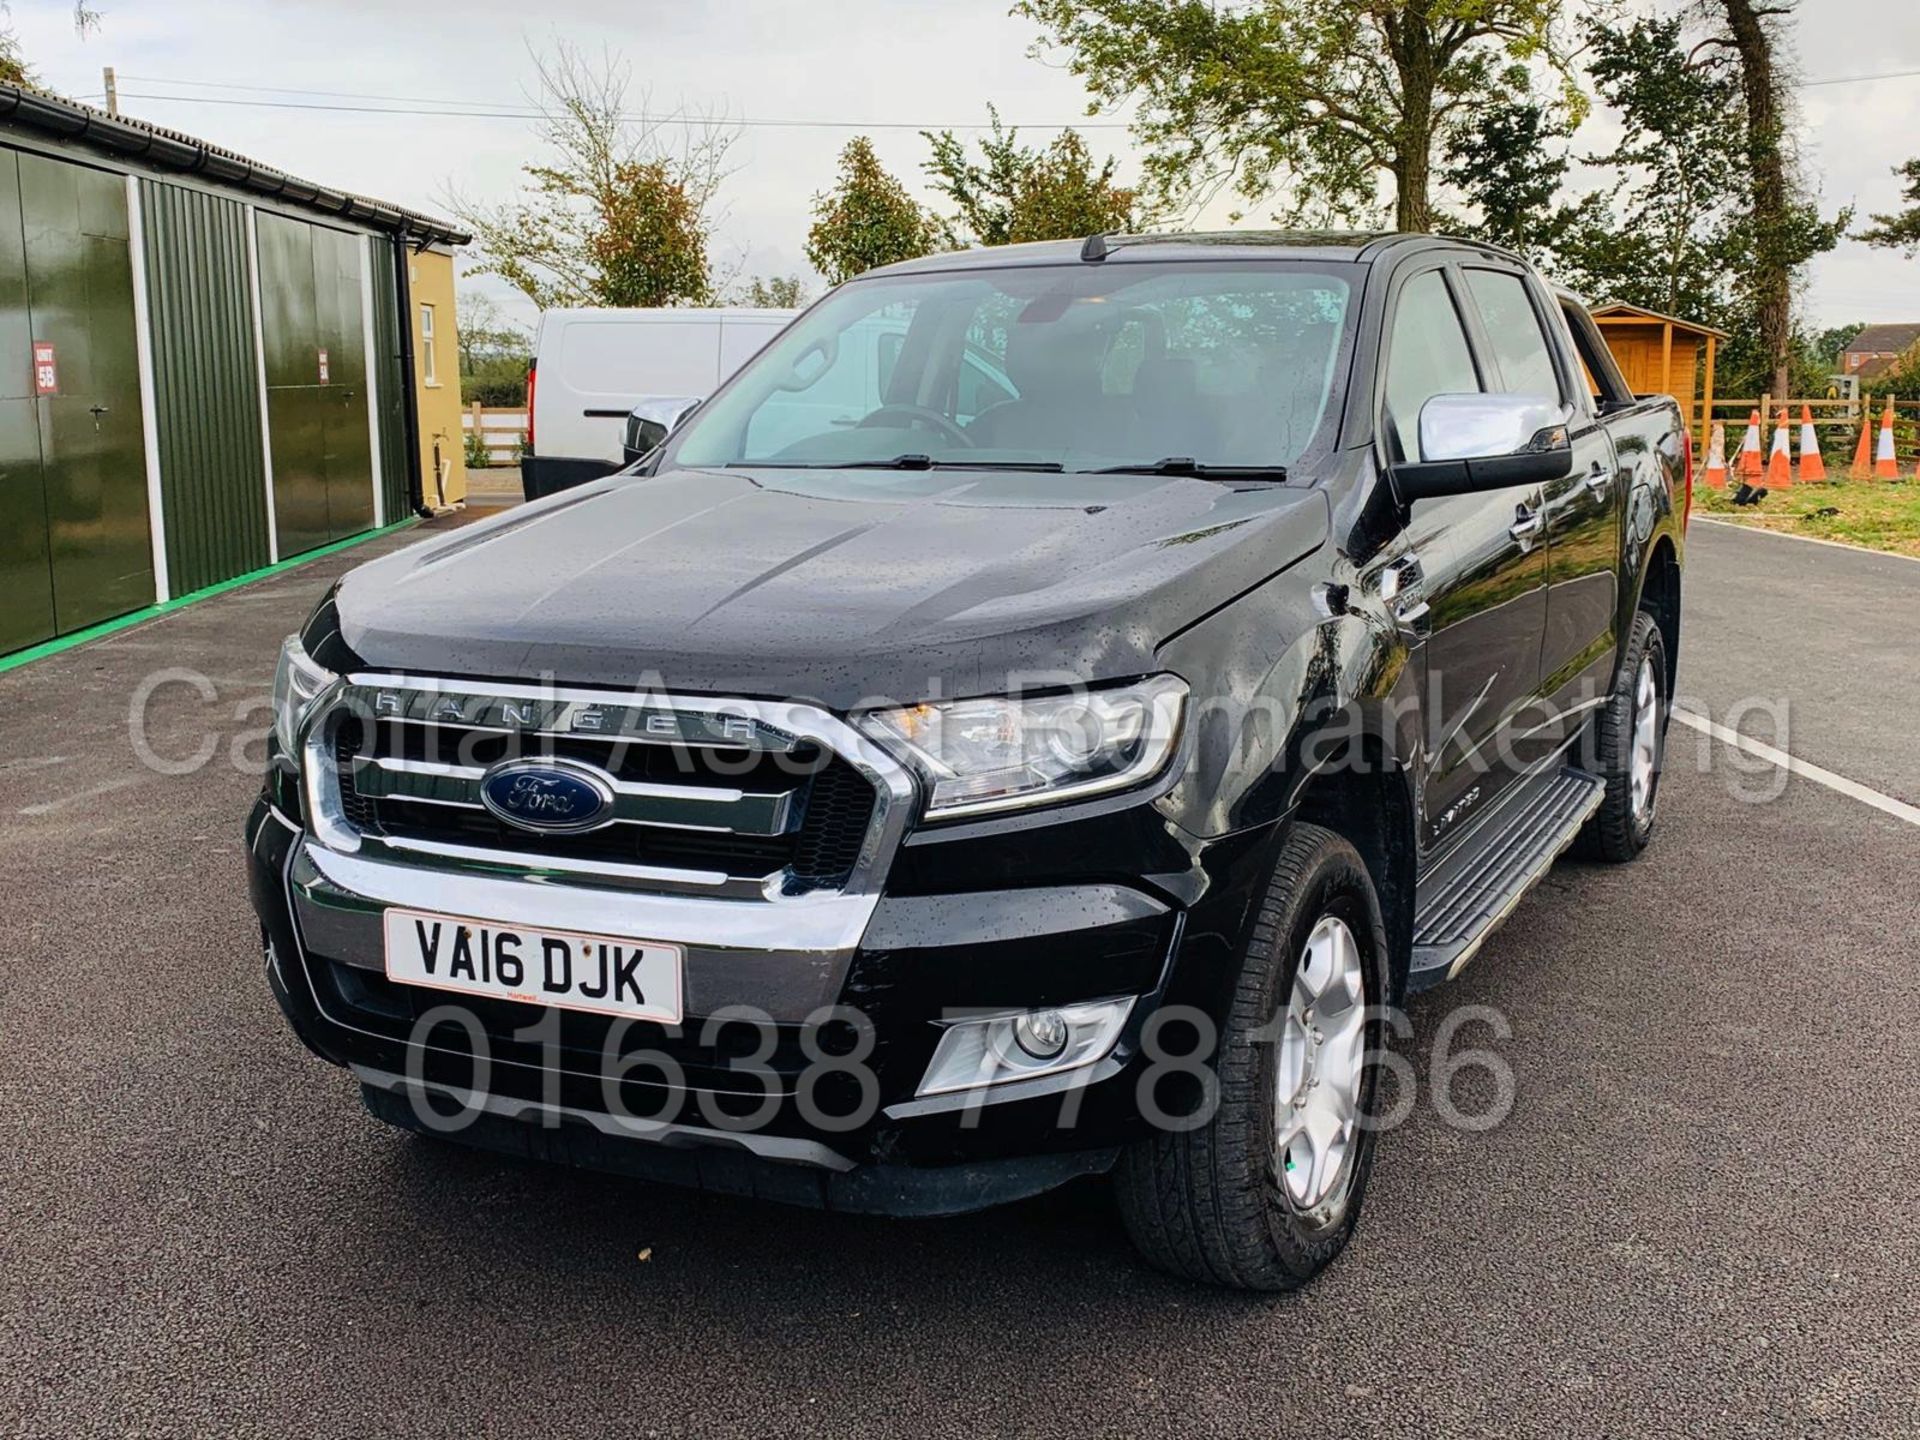 (On Sale) FORD RANGER *LIMITED EDITION* DOUBLE CAB PICK-UP (2016) '2.2 TDCI - 160 BHP' *HUGE SPEC* - Image 2 of 46